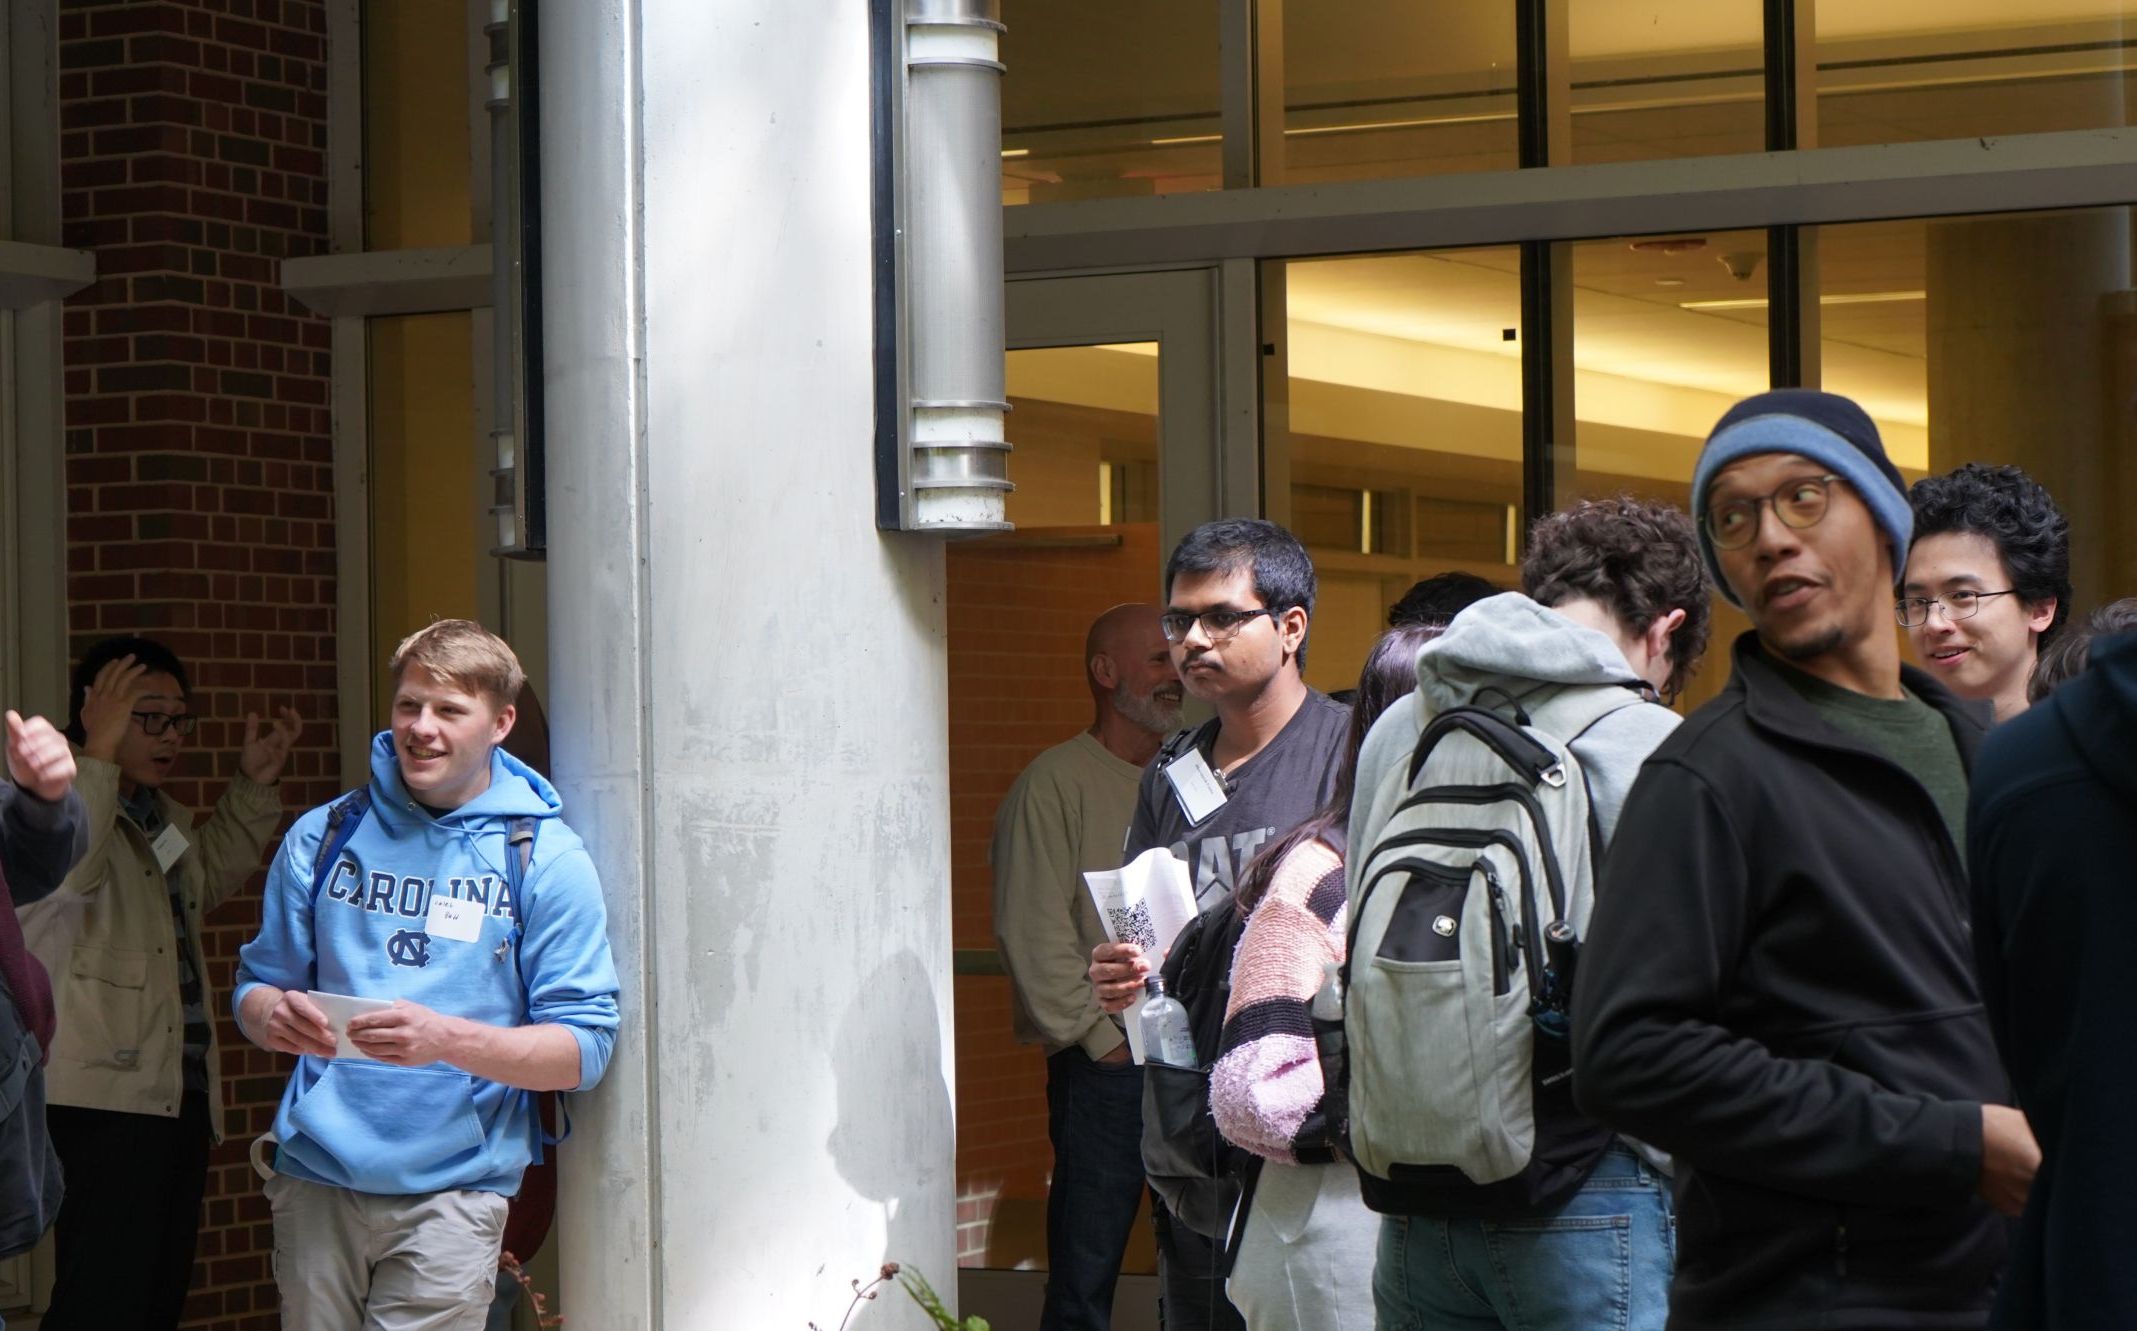 Professor Wilkerson-Hill turns towards something that has caught his attention behind him.  Other students and faculty can be seen talking in the background. One student leans against a support post while smiling.